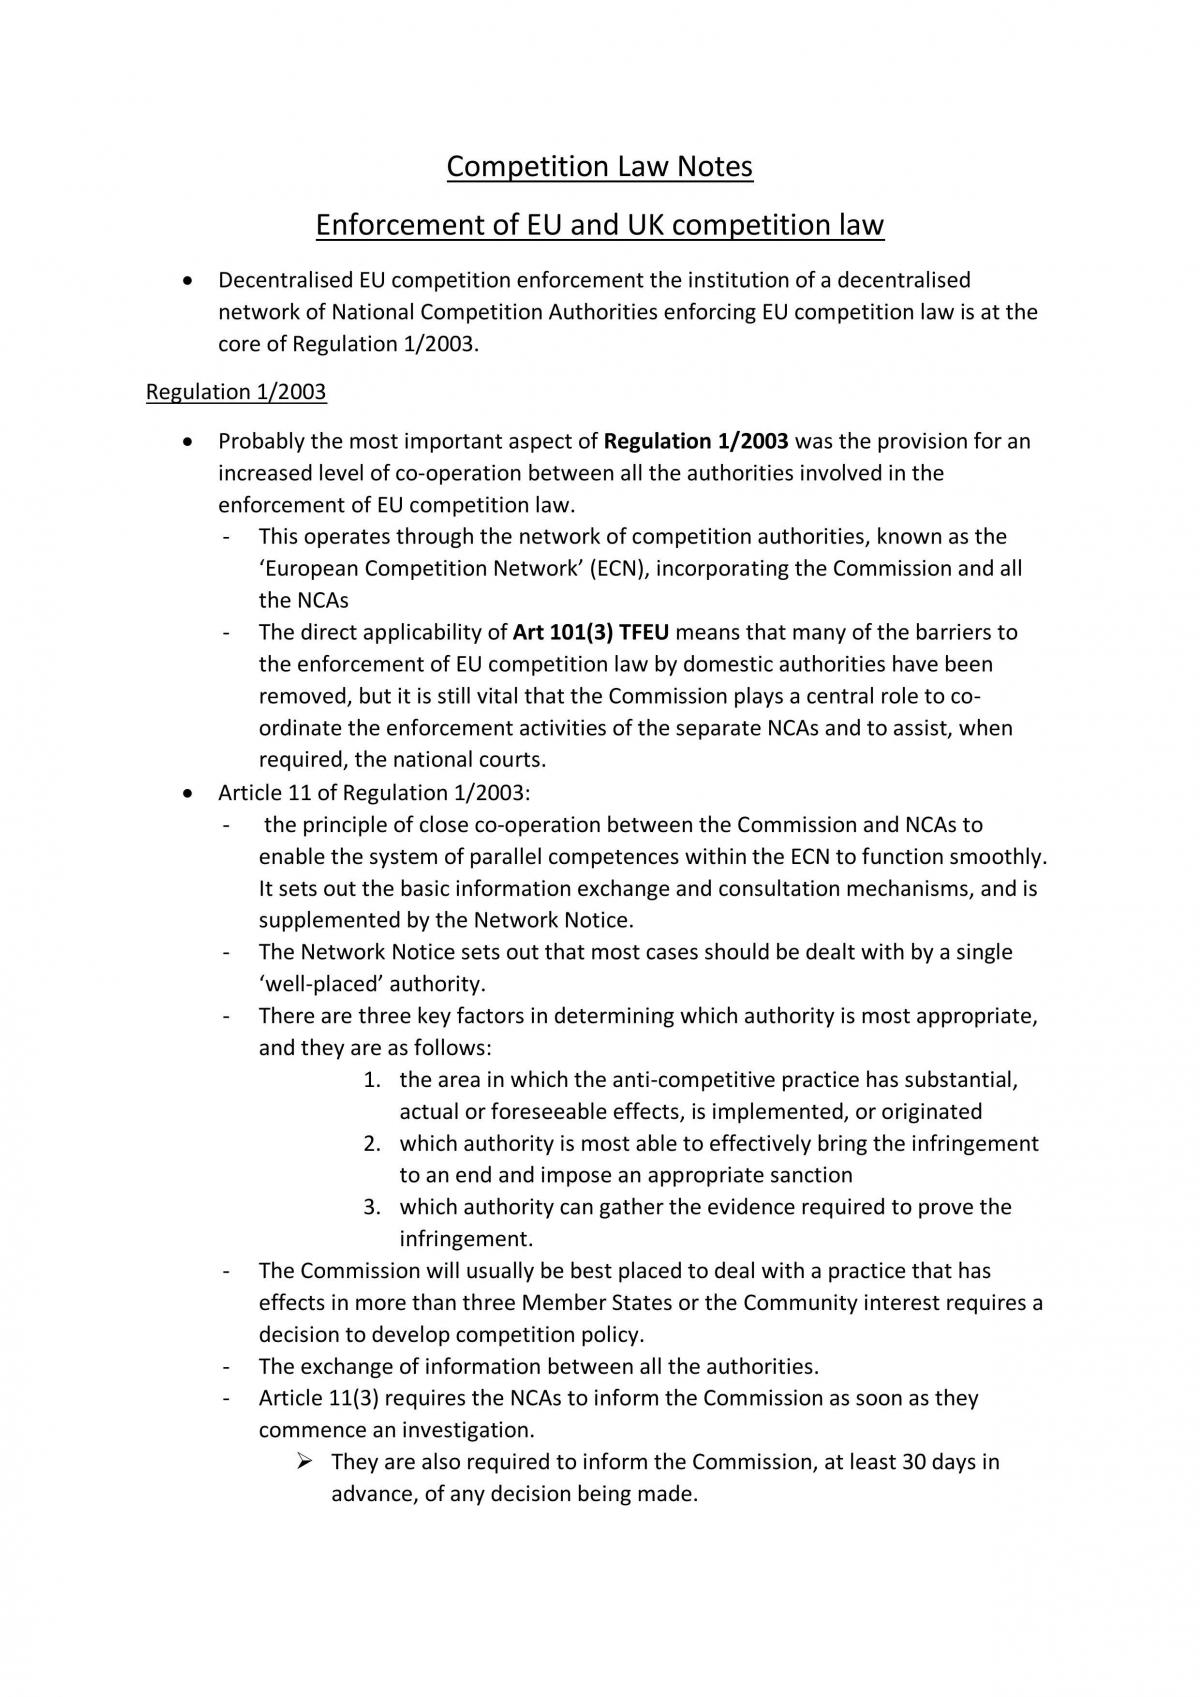 Full Competition Law Notes  - Page 1